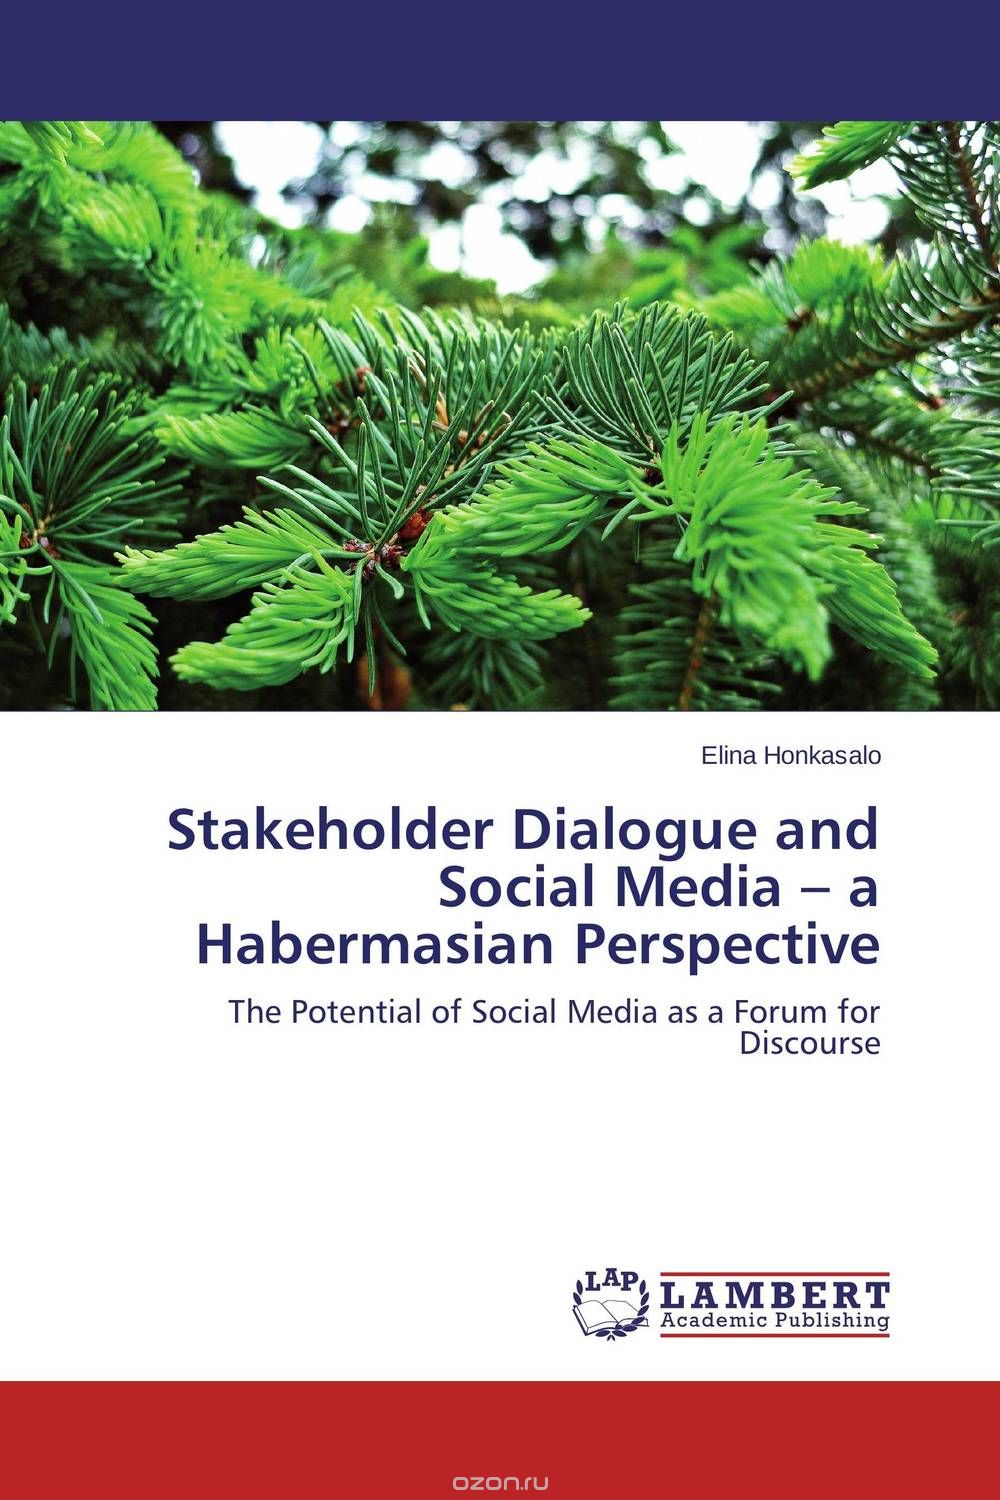 Stakeholder Dialogue and Social Media – a Habermasian Perspective